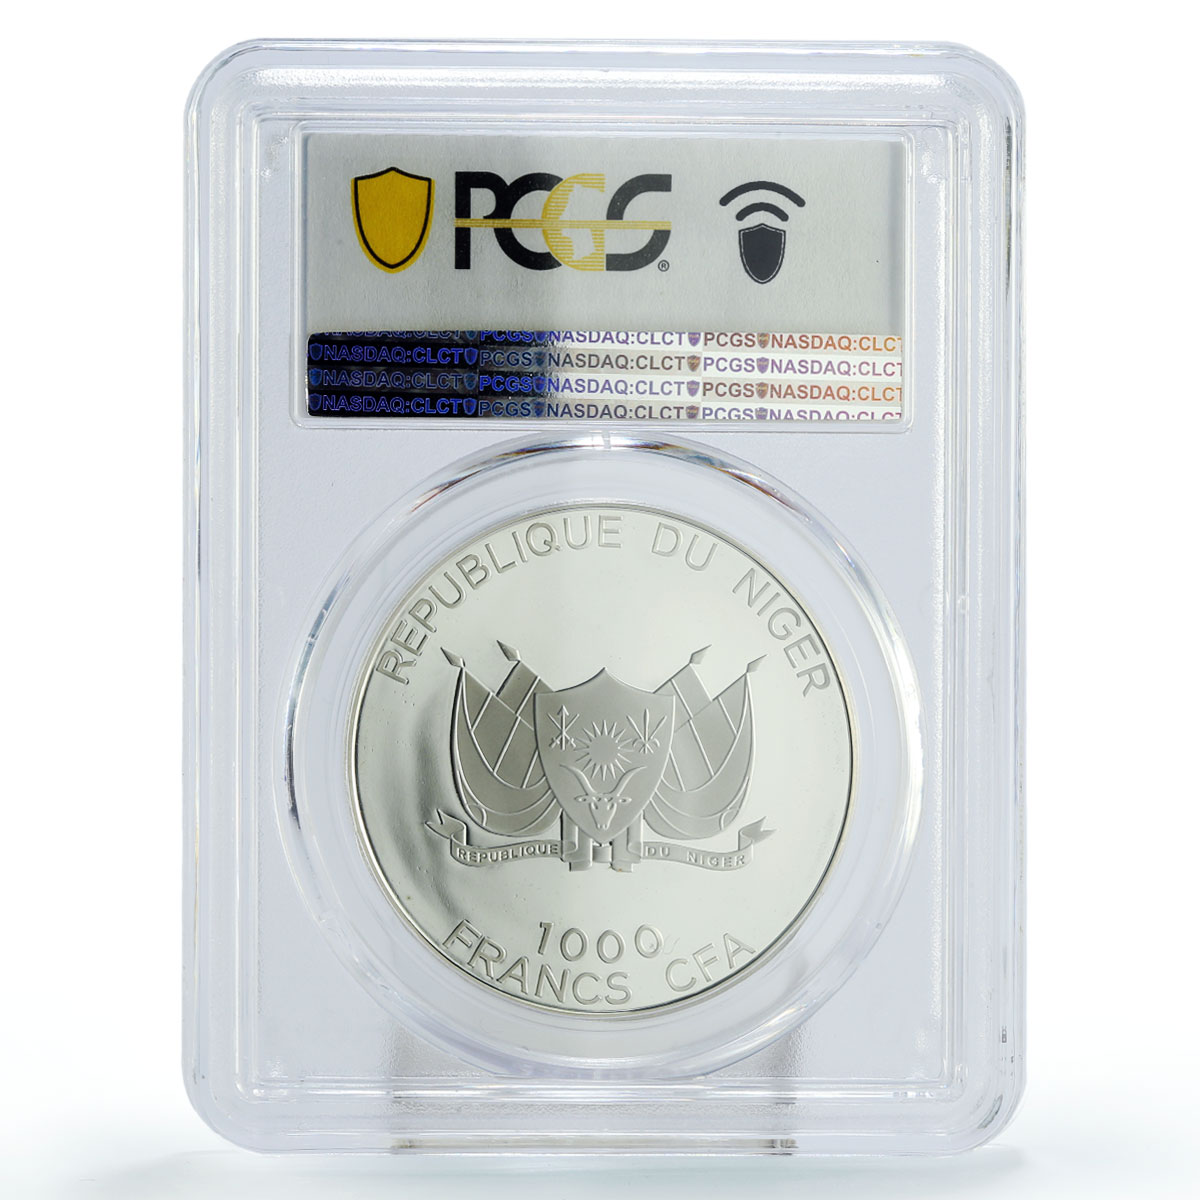 Niger 1000 francs Muslim Baby-Naming Round PR69 PCGS proof silver coin 2015